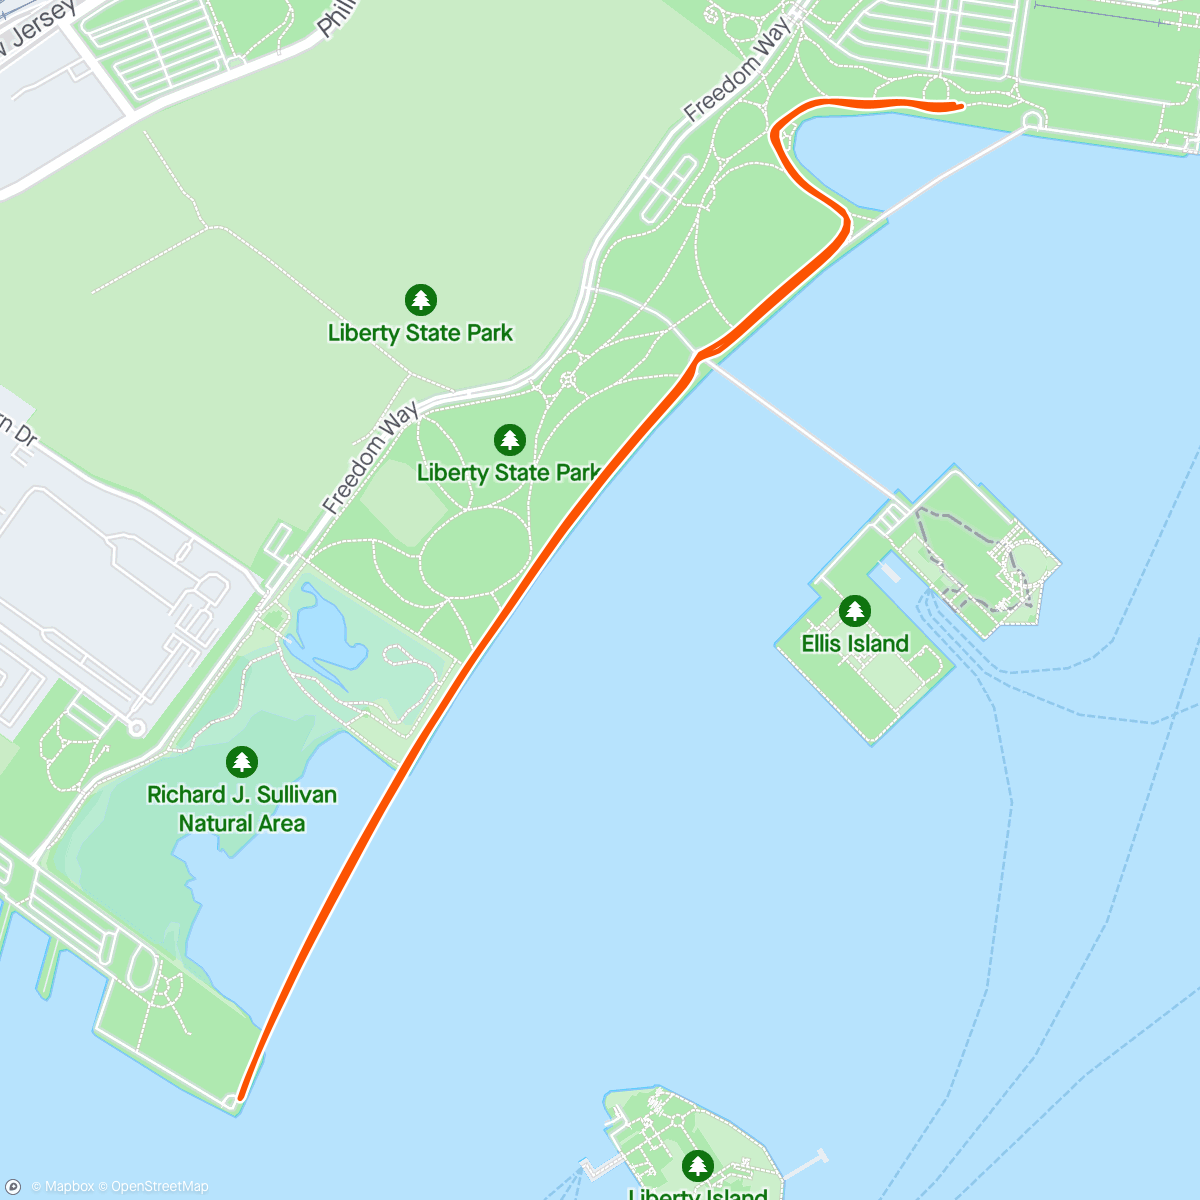 「Jersey City 5k: gorgeous and historic location that I paid zero attention to as I struggled to keep my breakfast down (1st in age group; 6th overall)」活動的地圖